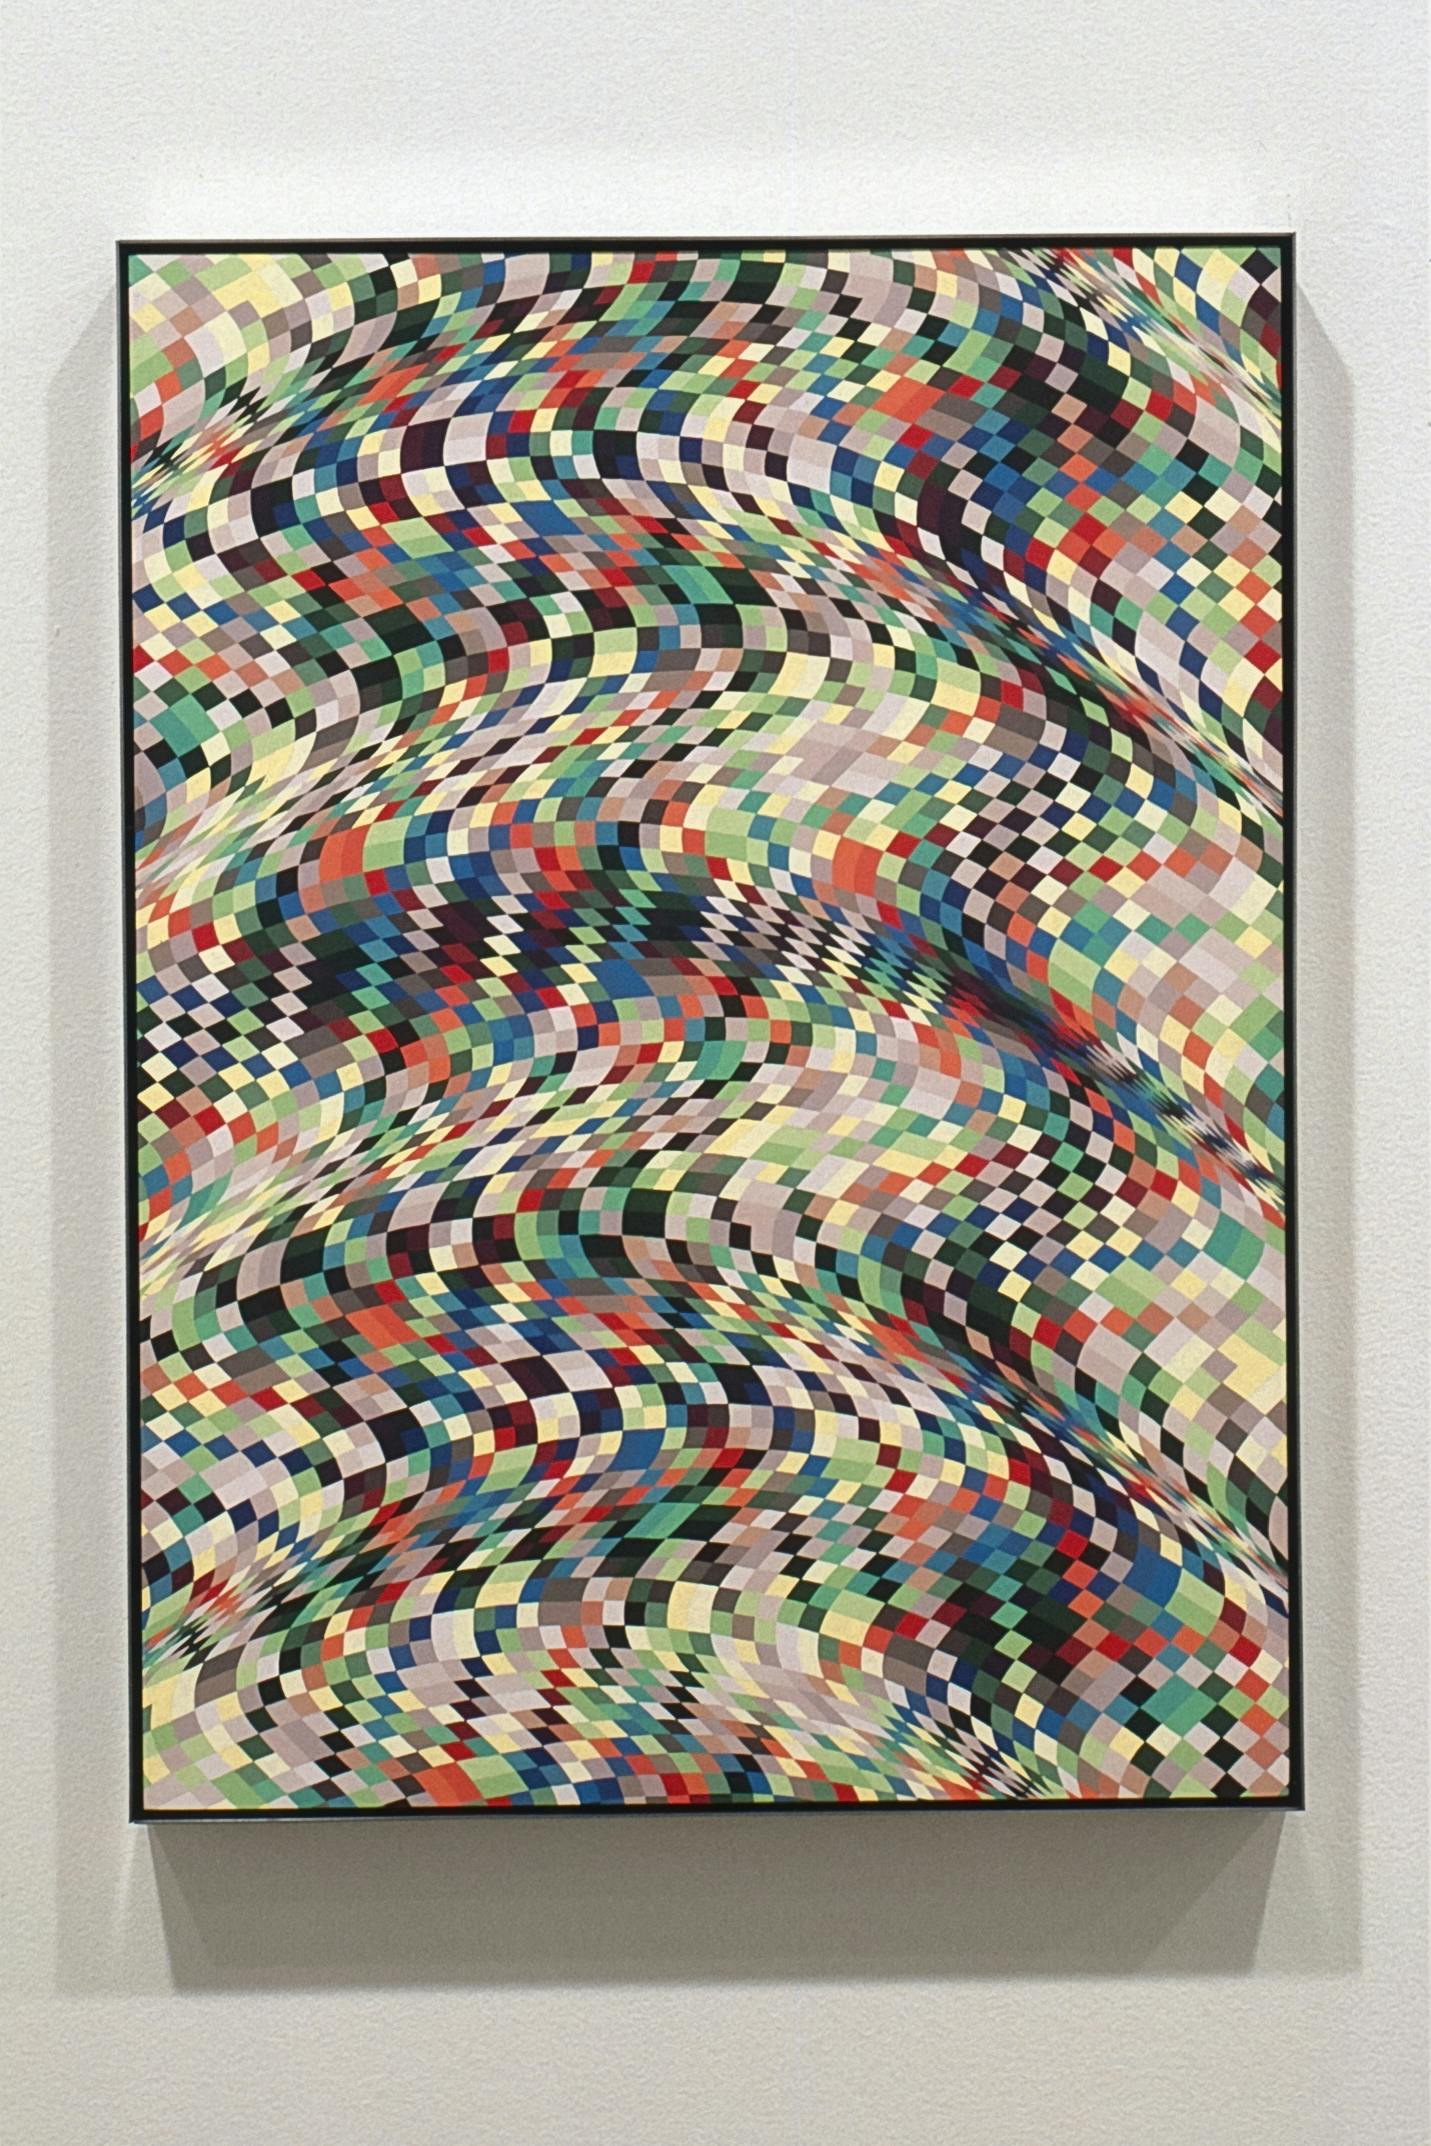 A large optical painting is installed on the gallery wall. Various coloured squares are painted in a specific way that gives viewers an illusion that the surface of the canvas is wavy and unleveled. 